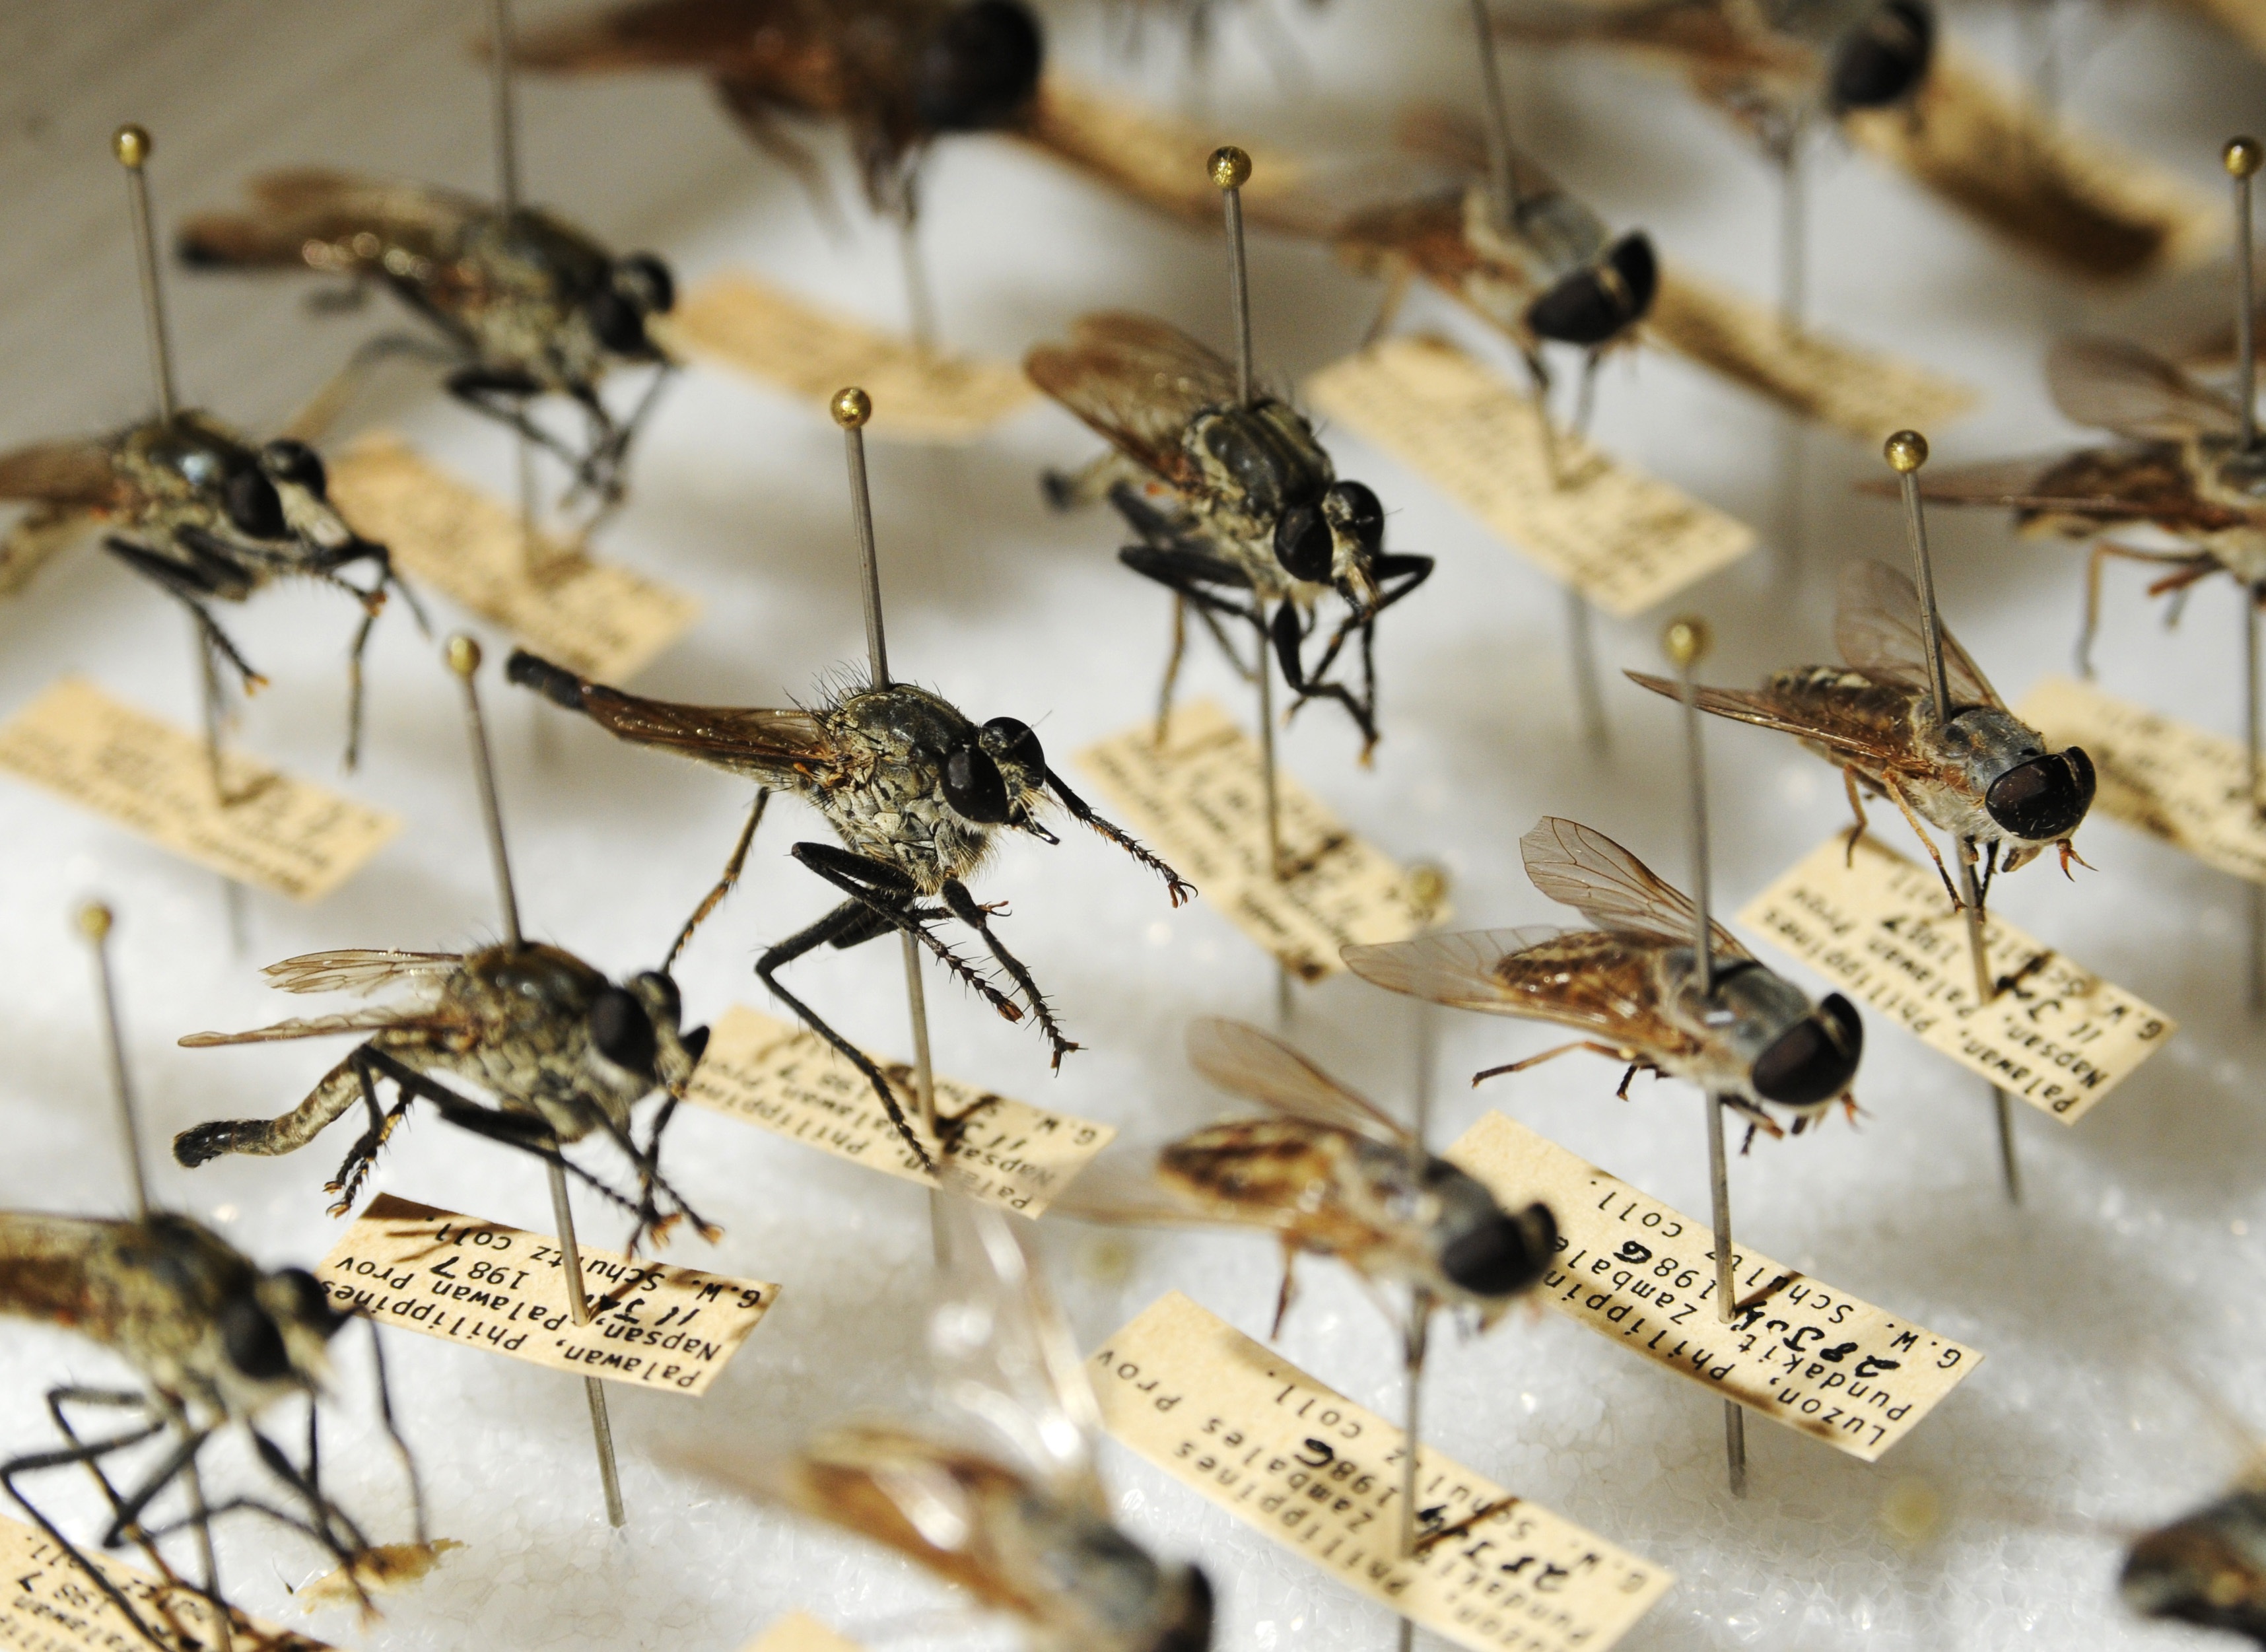 Types of Mosquitoes, Animal, Fly, Insect, Mosquito, HQ Photo